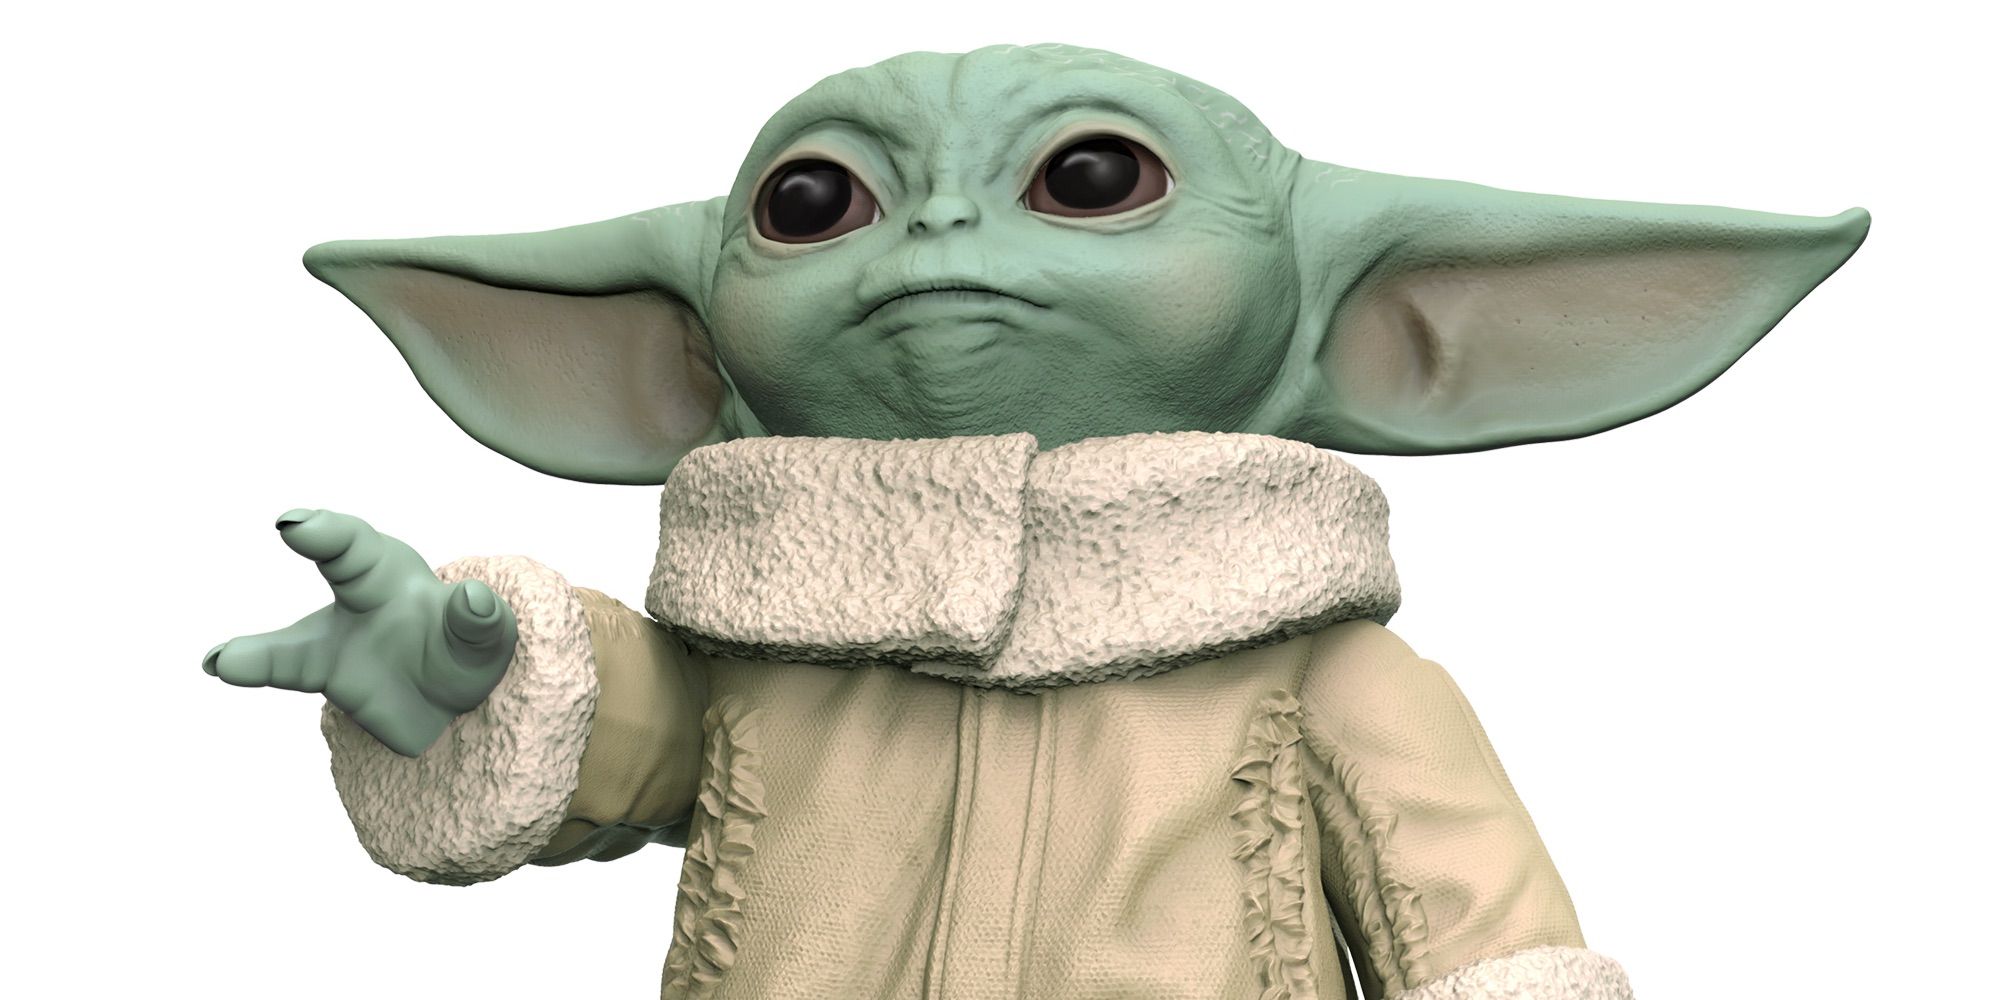 Hasbro’s First Baby Yoda Toy Revealed, Releases May 2020